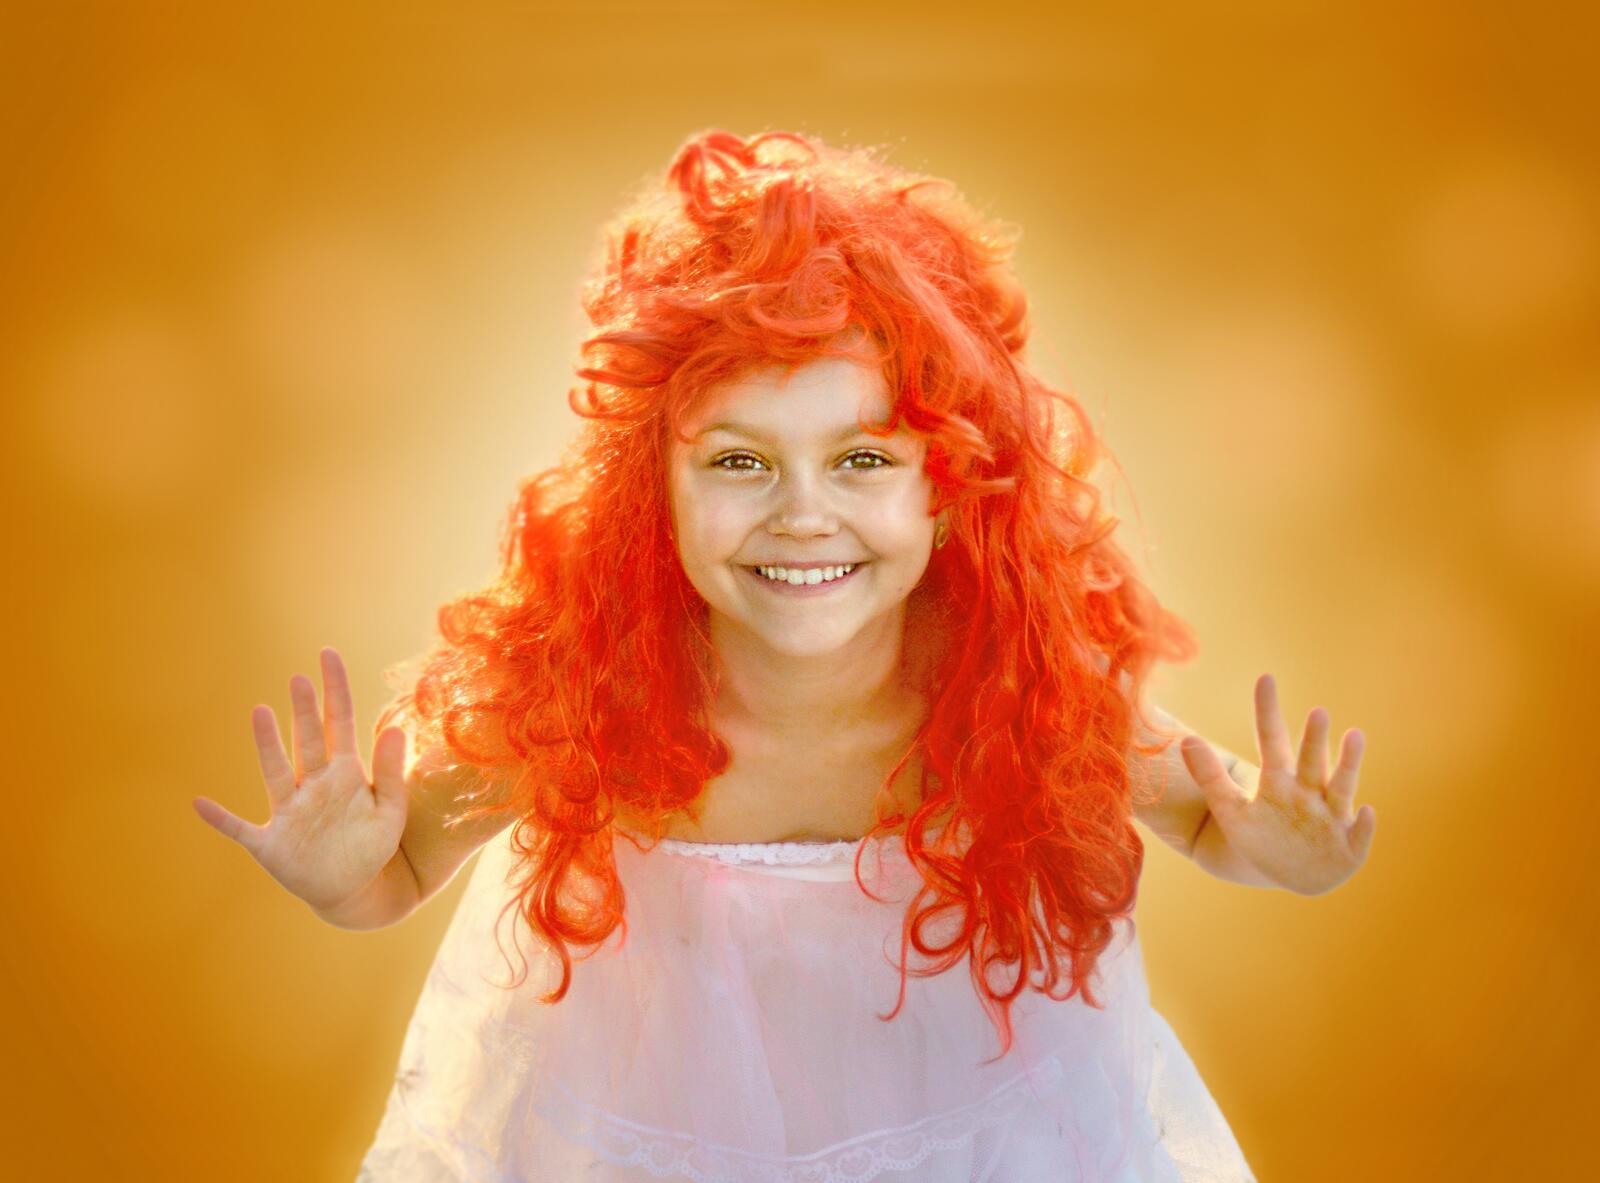 Free photo A little girl with red hair